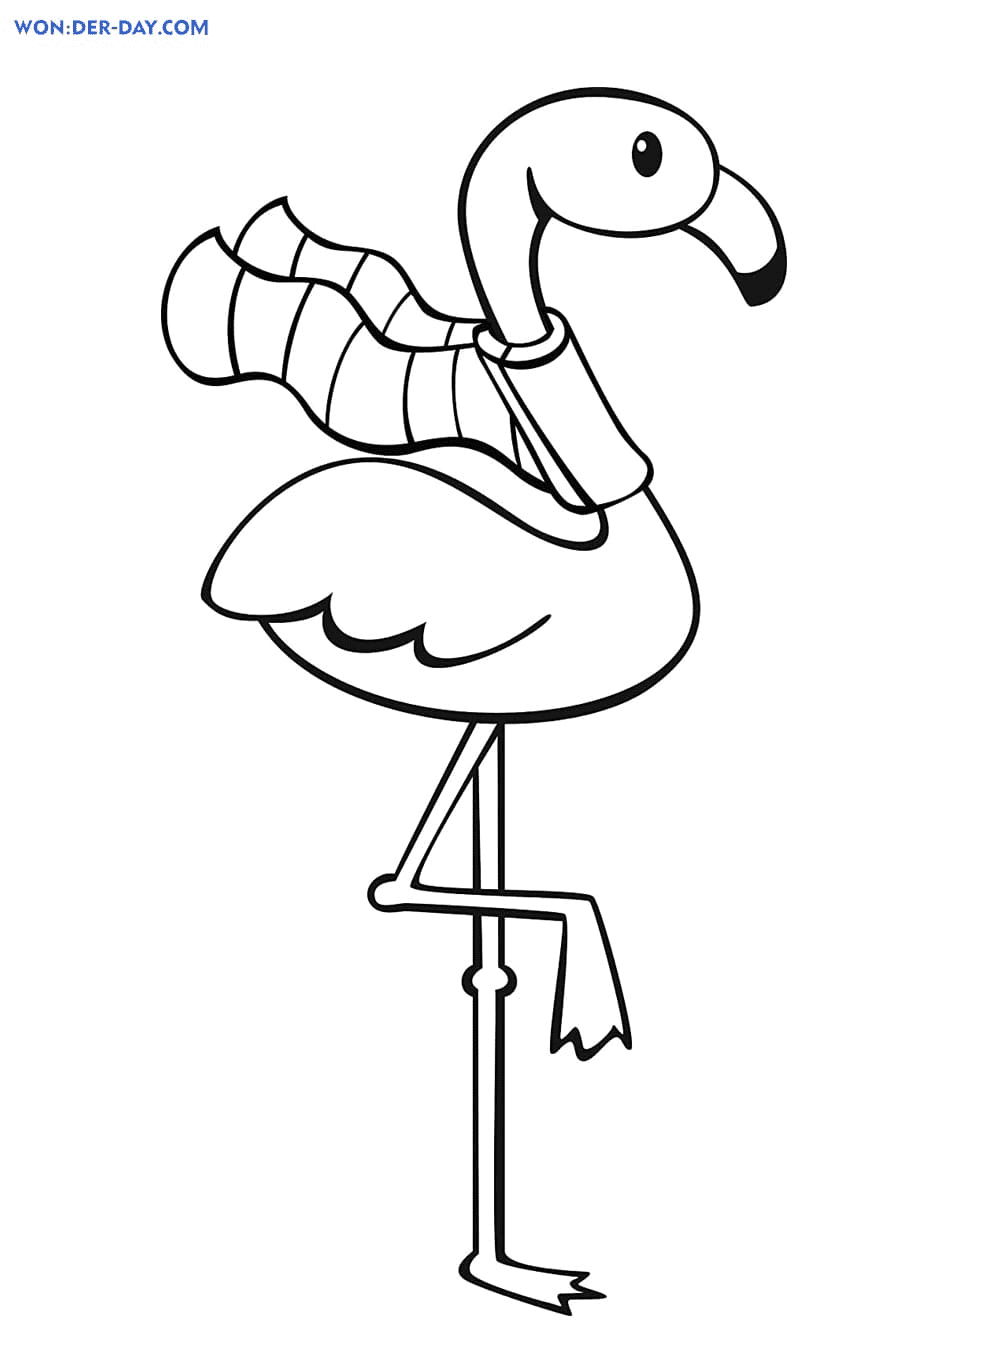 Flamingo in a Scarf Coloring Page